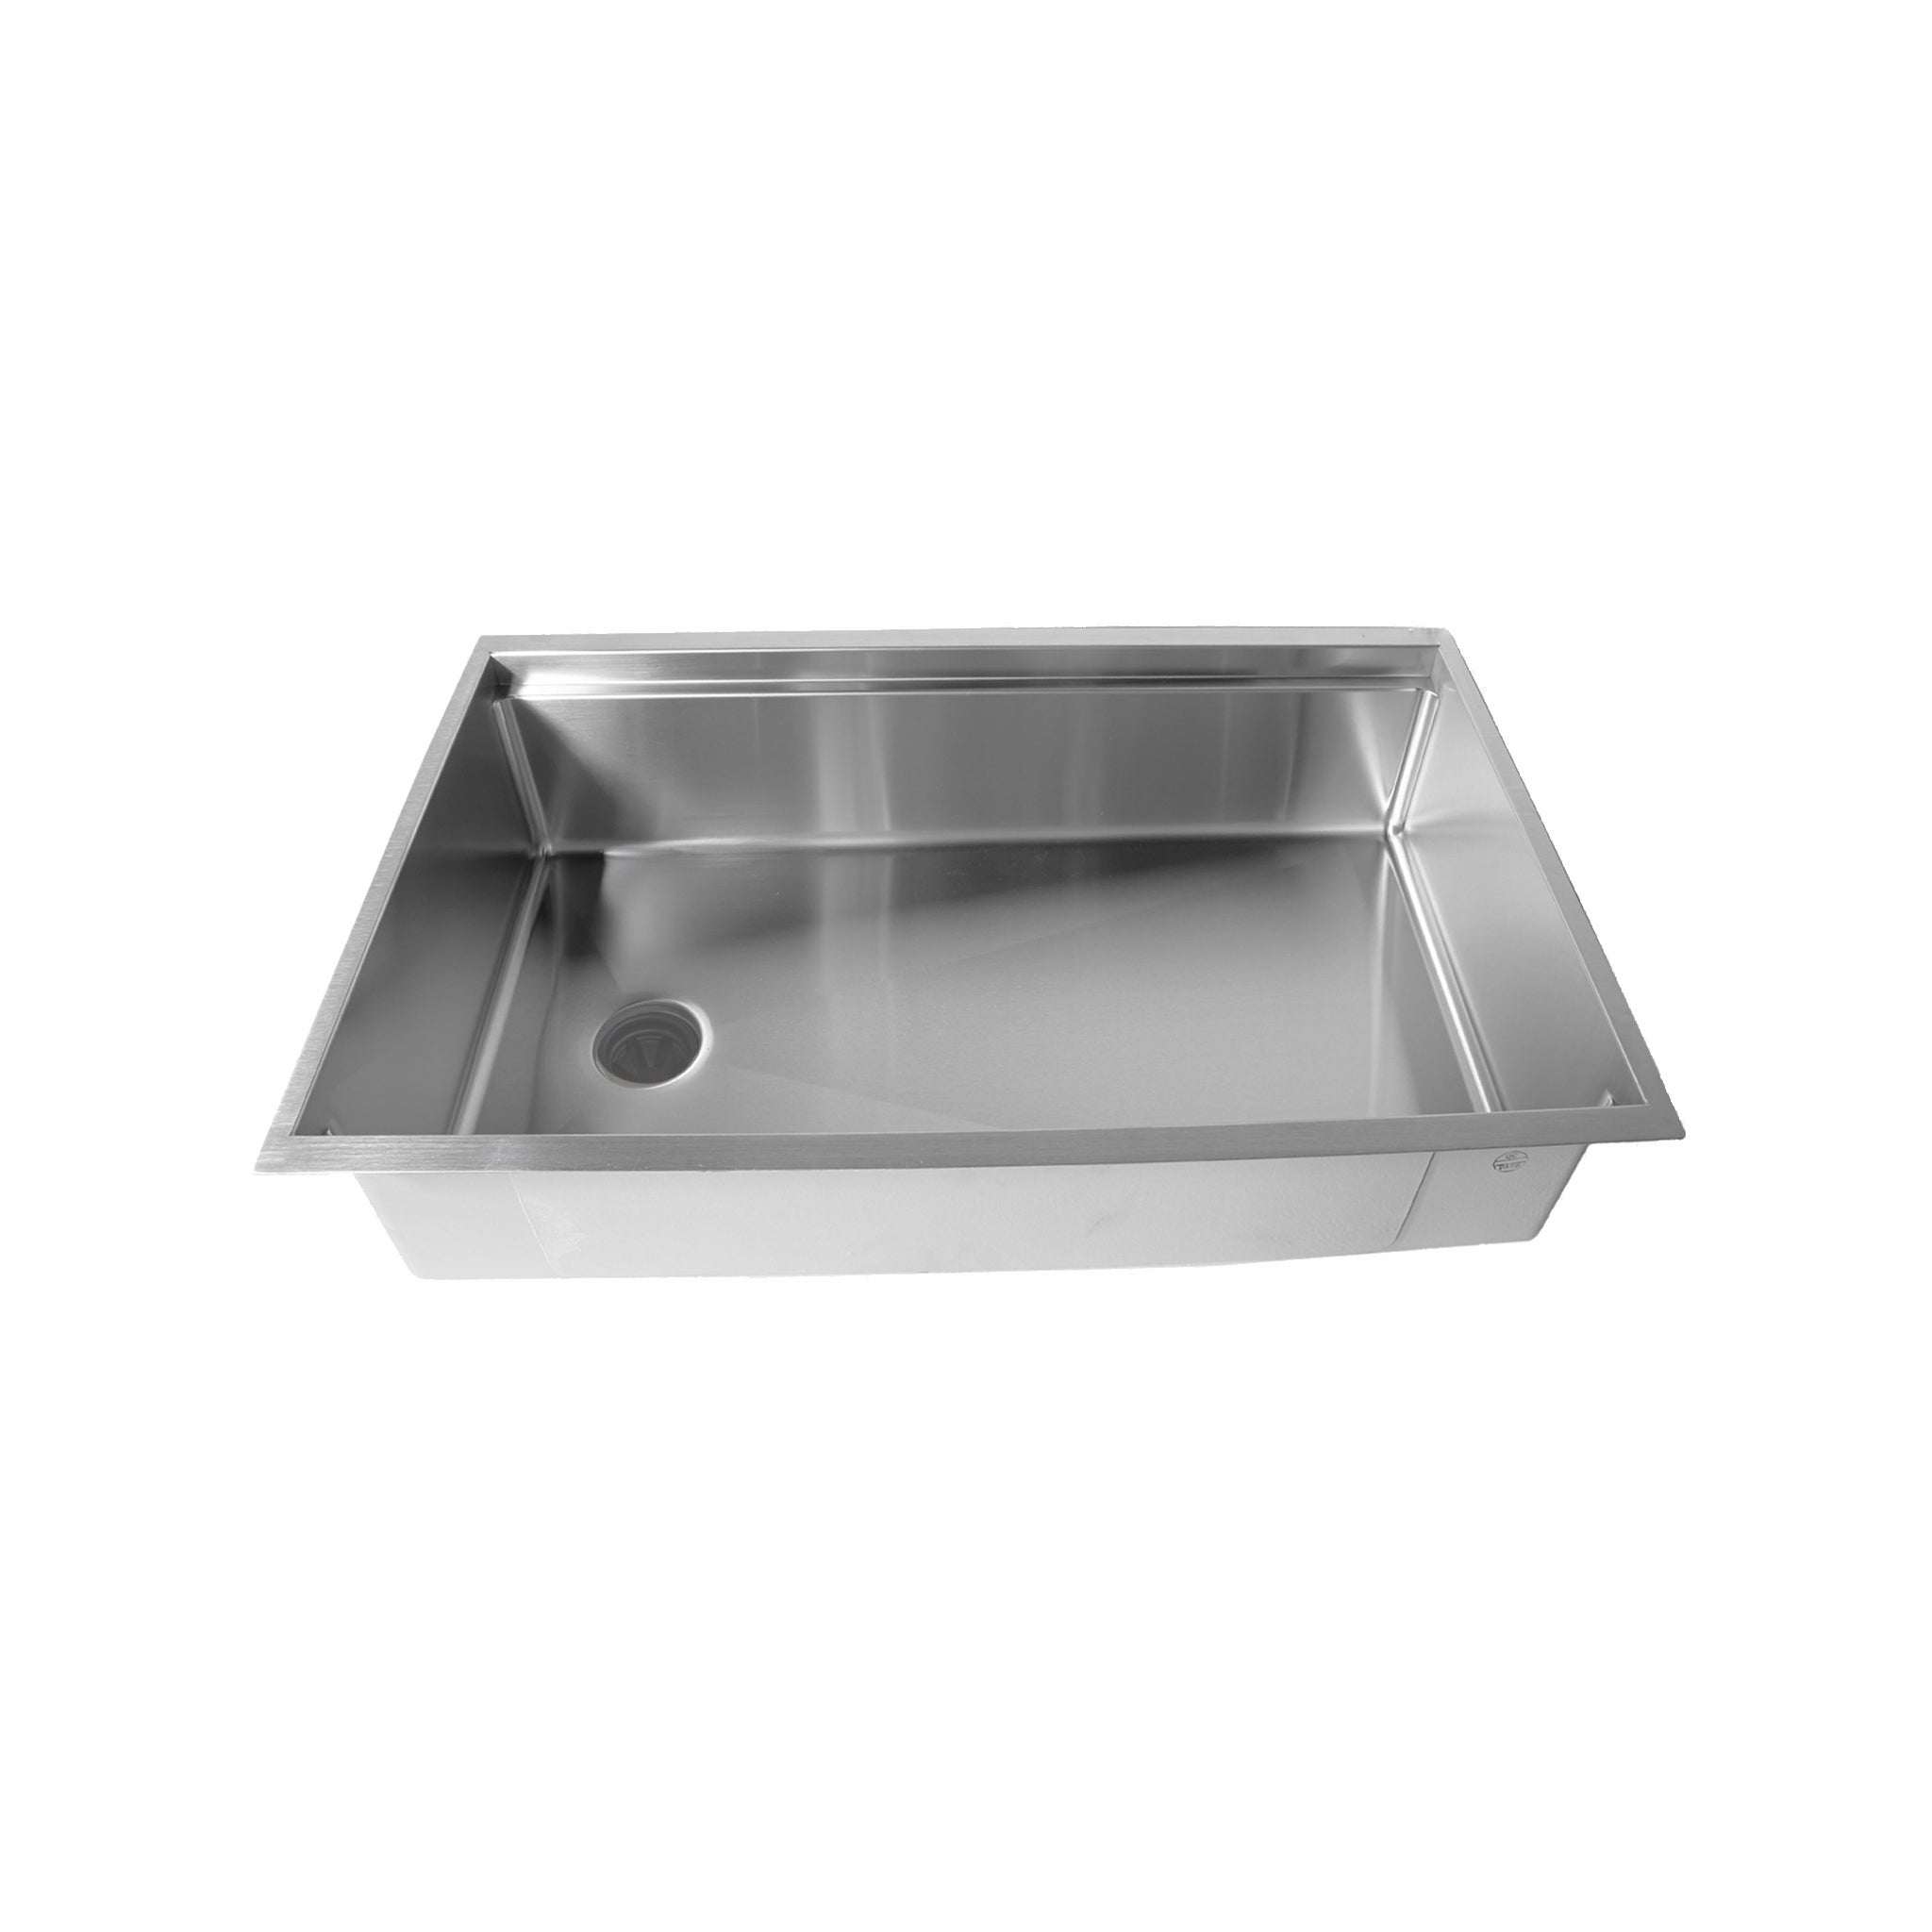 31” workstation sink from Create Good Sinks with a seamless, reversible drain in the center of the basin.